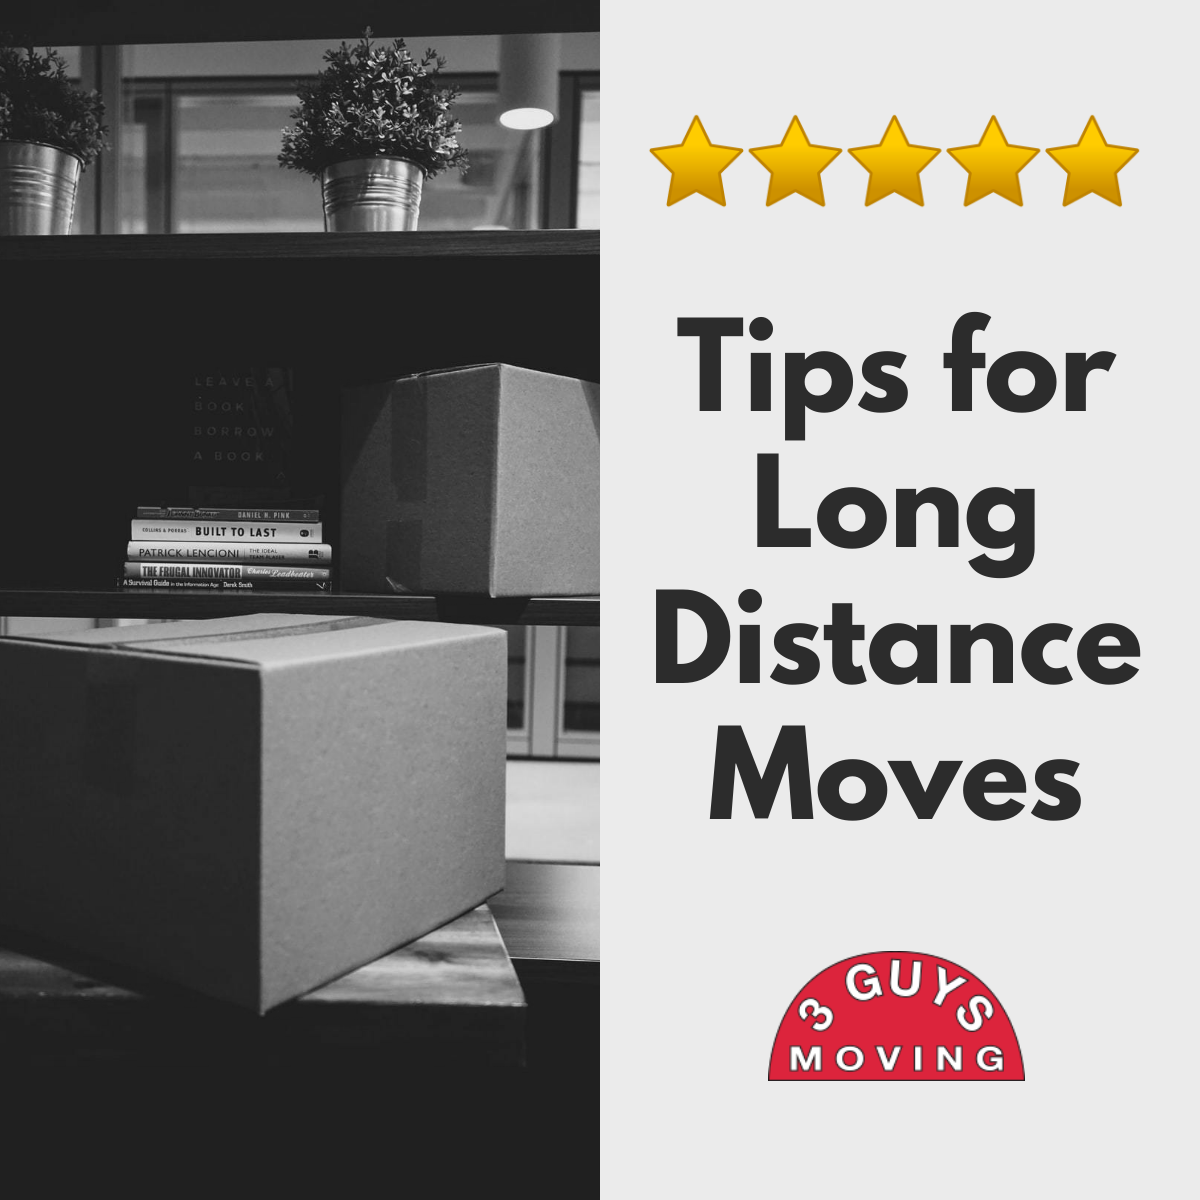 Tips for Long Distance Moves - Tips for Long Distance Moves